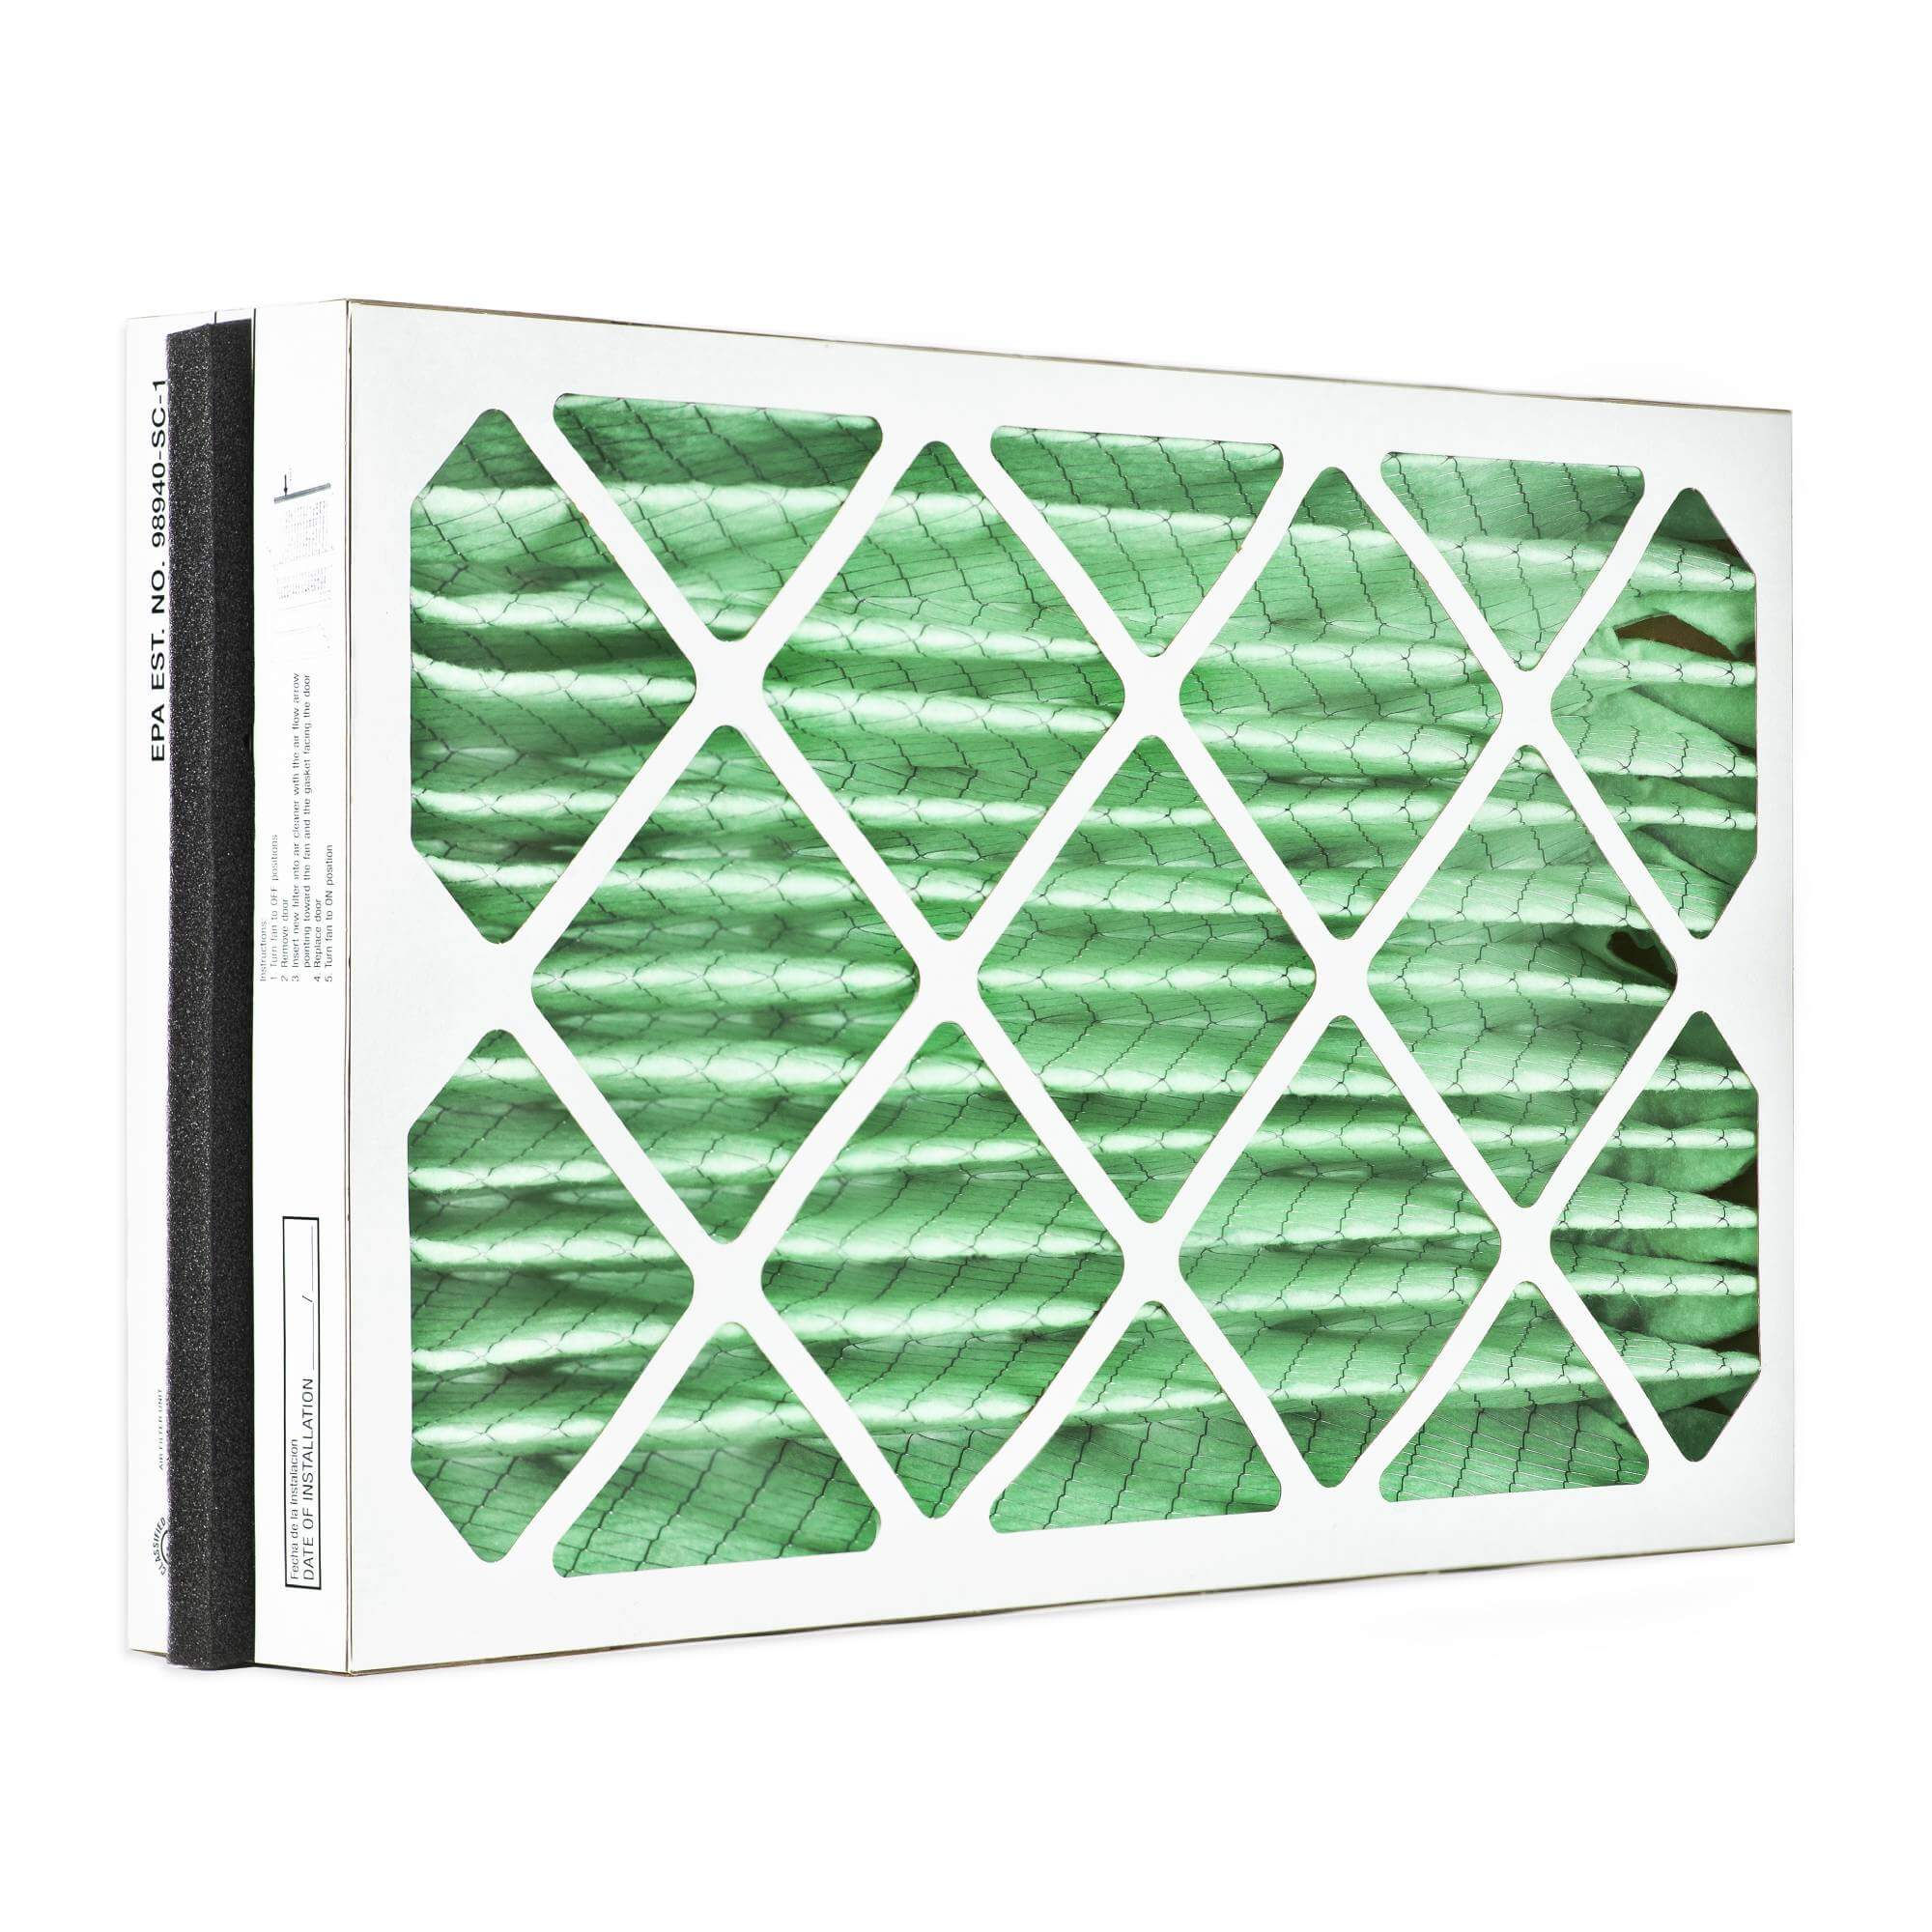 AprilAire 413 Filters Fastr Clean Green 413 Replacement for AprilAire 413, 16x25x4 MERV 13 Healthy Home Air Filter - Guaranteed Fit